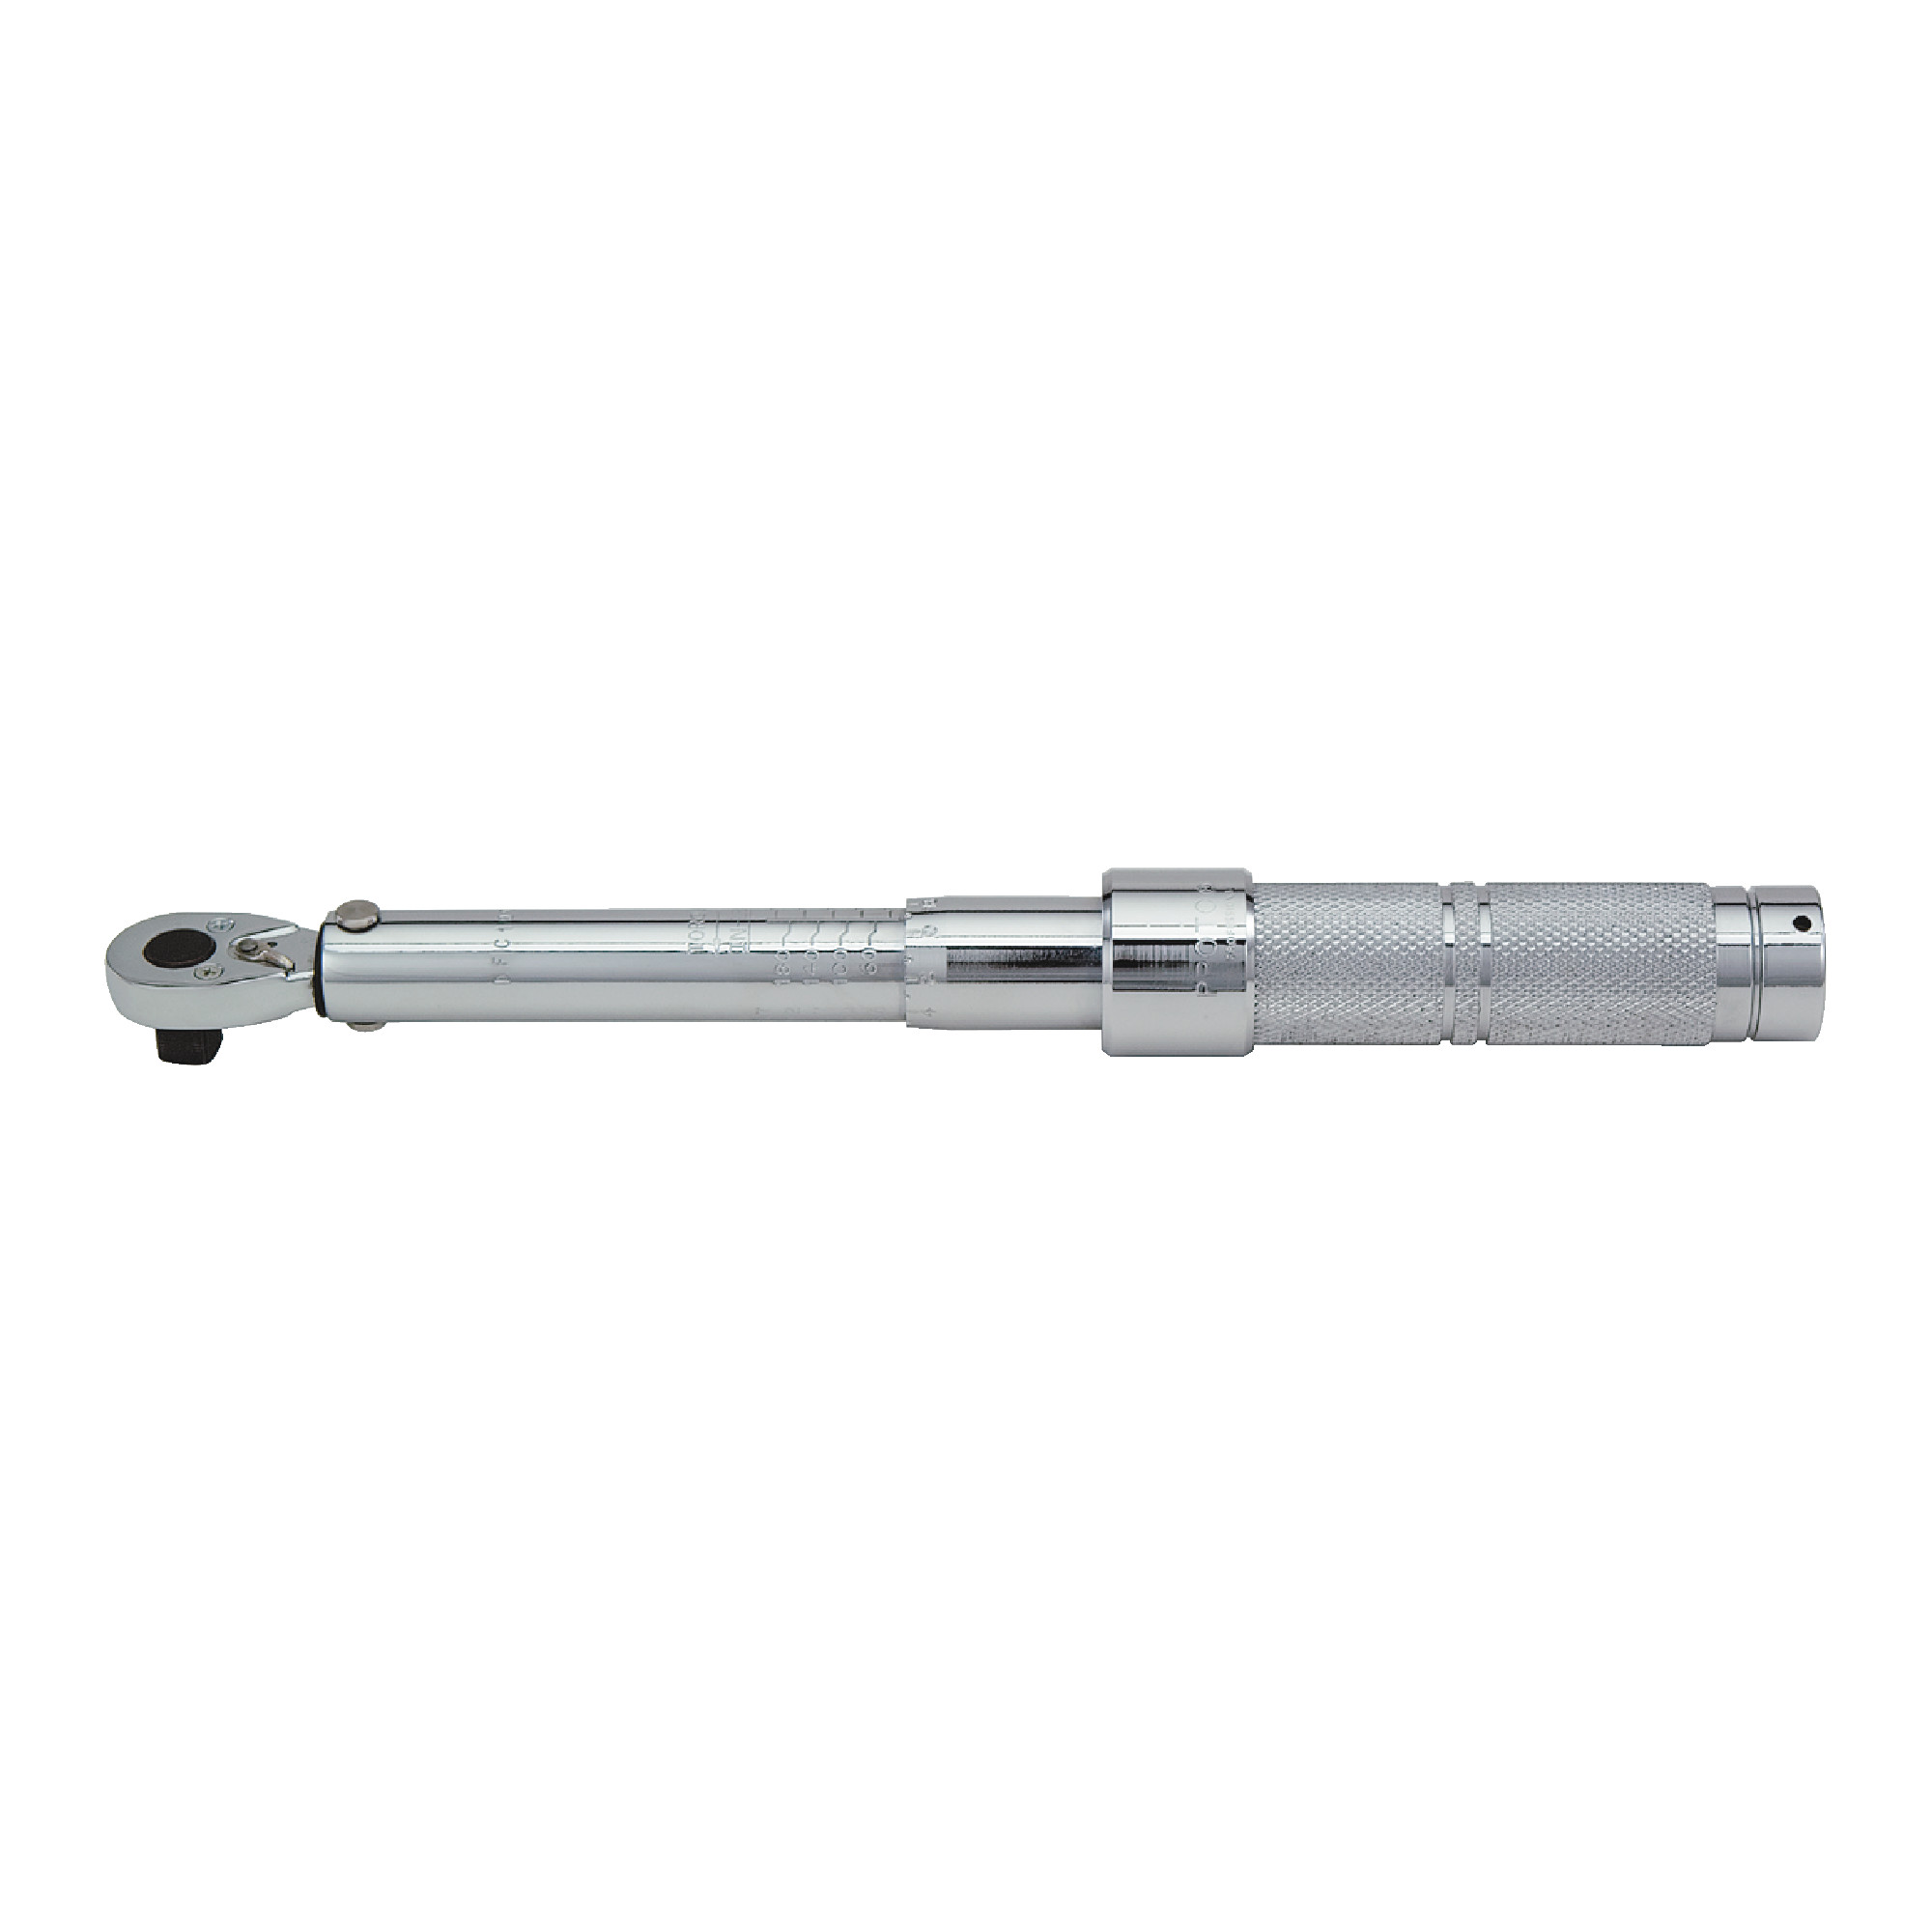 Ratcheting Head Adjustable Micrometer Torque Wrenches